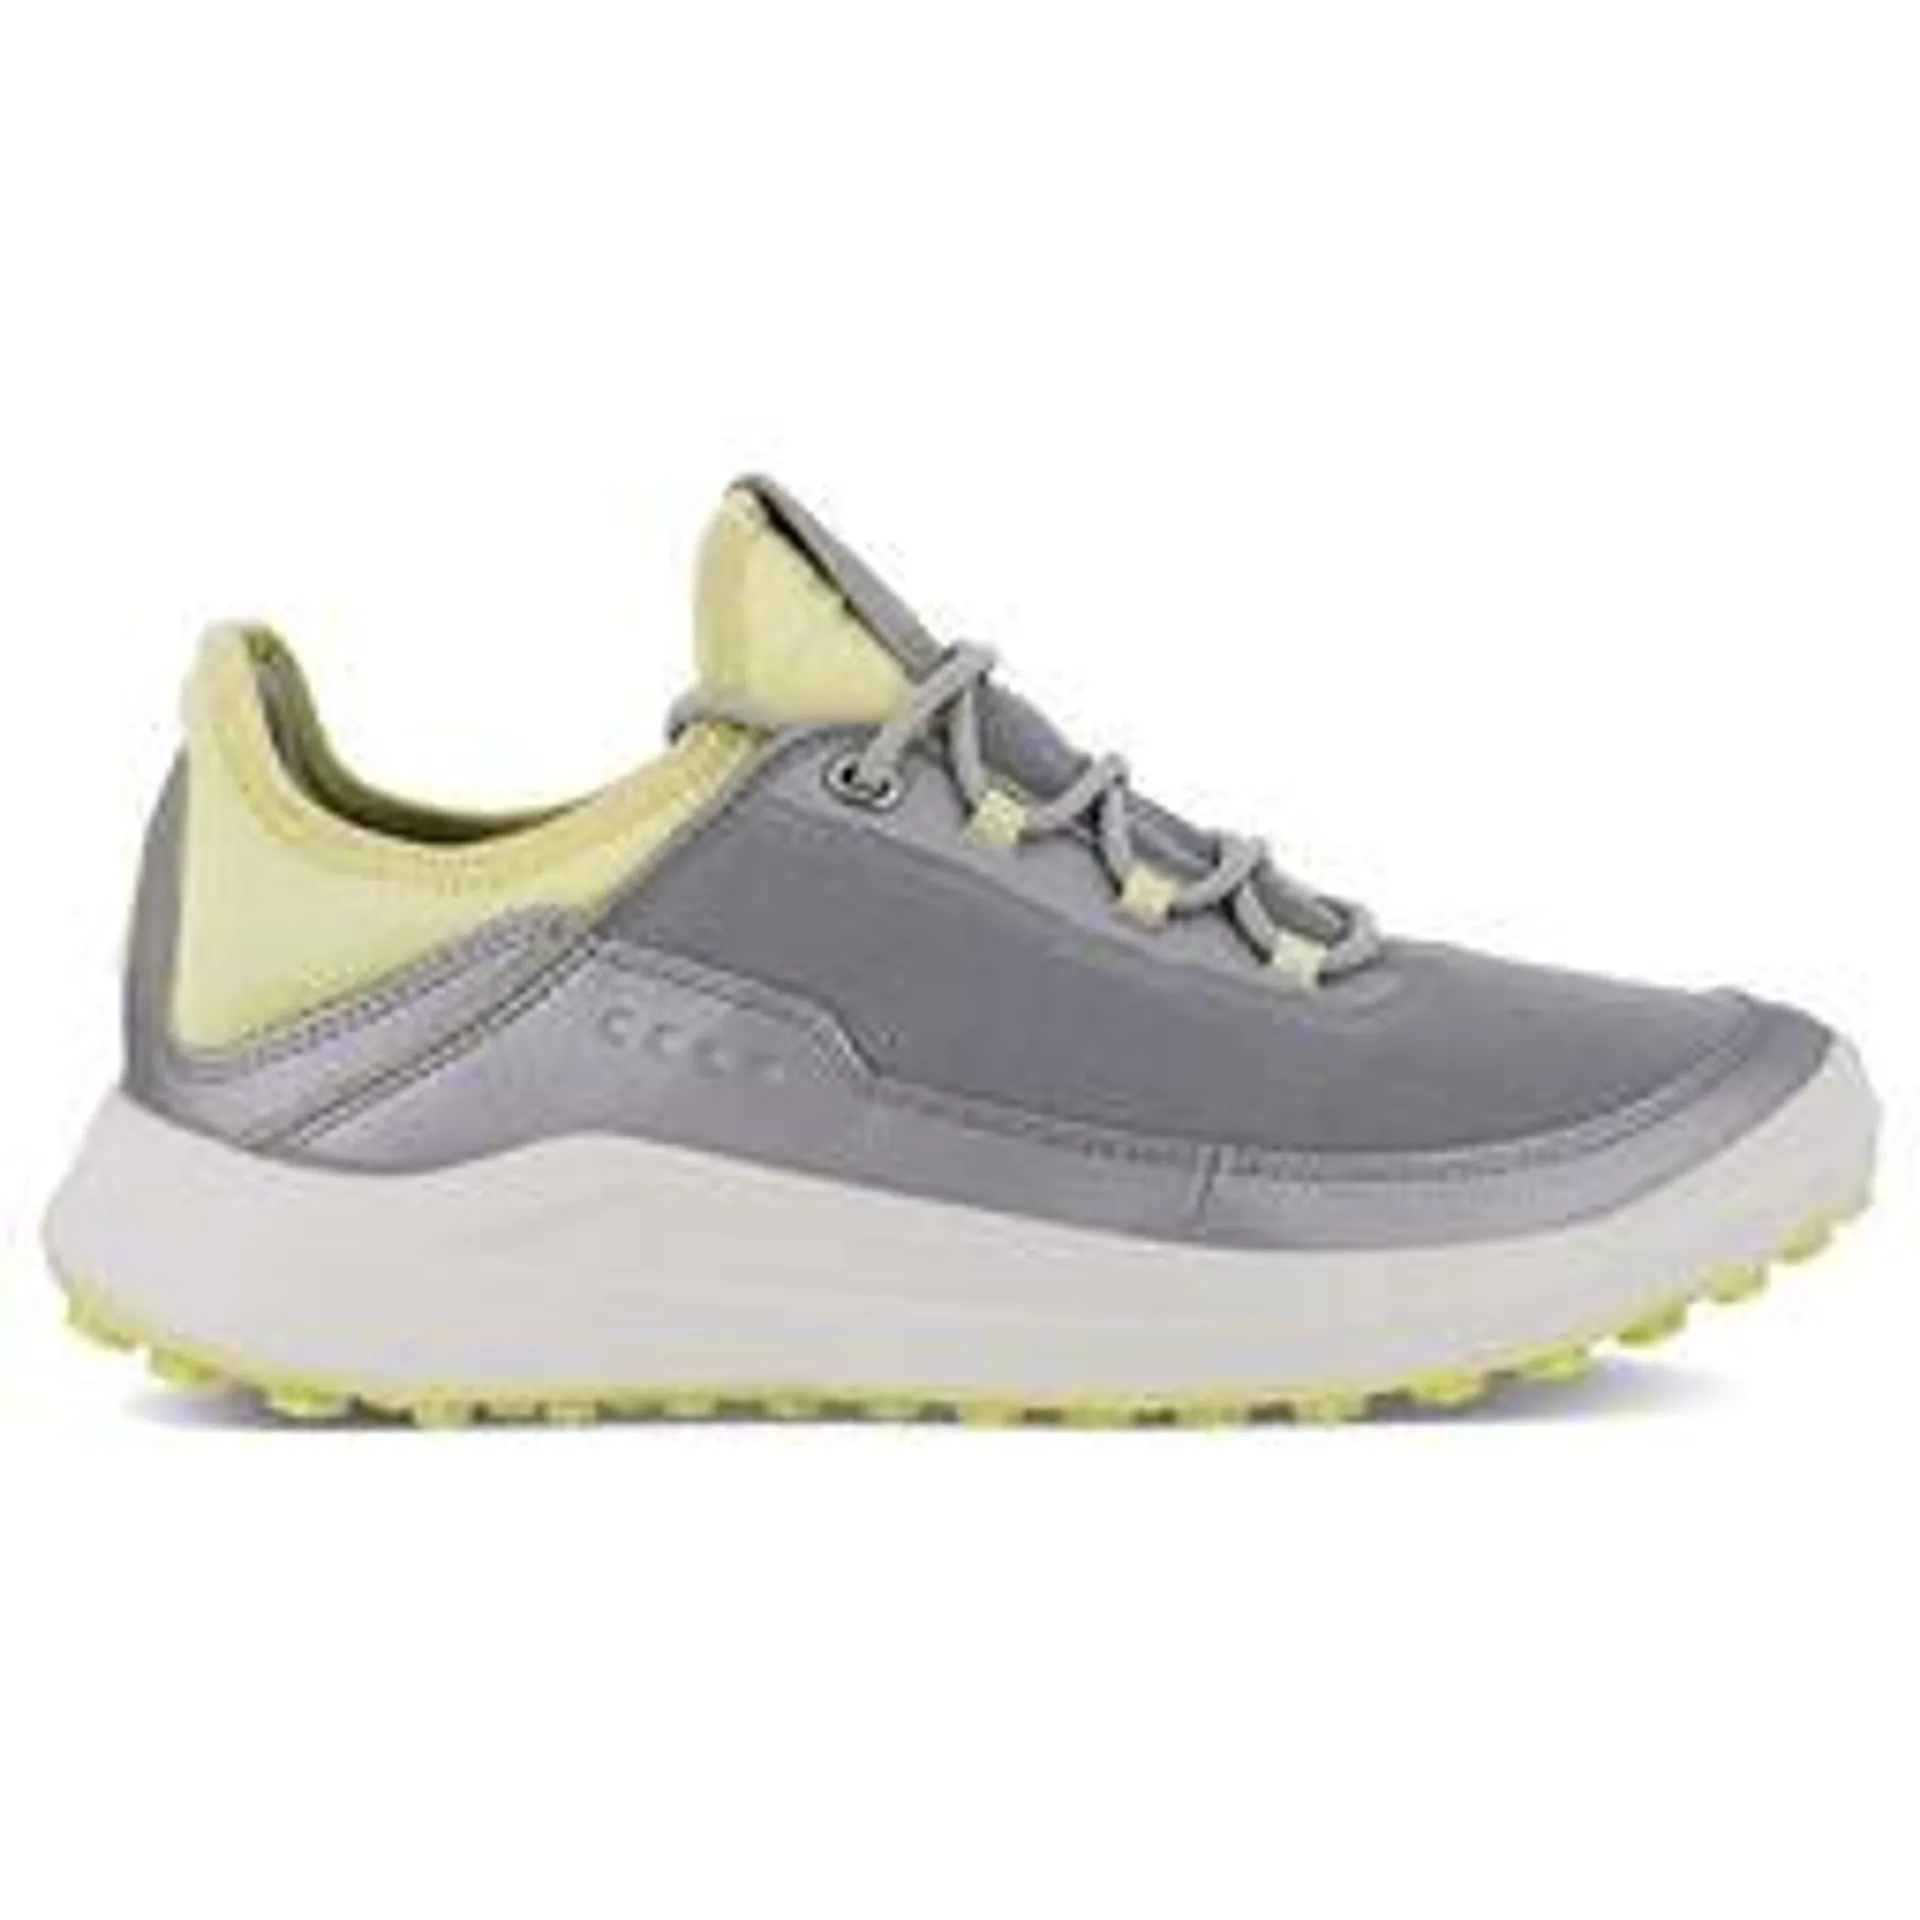 ECCO Ladies Core Mesh Spikeless Golf Shoes